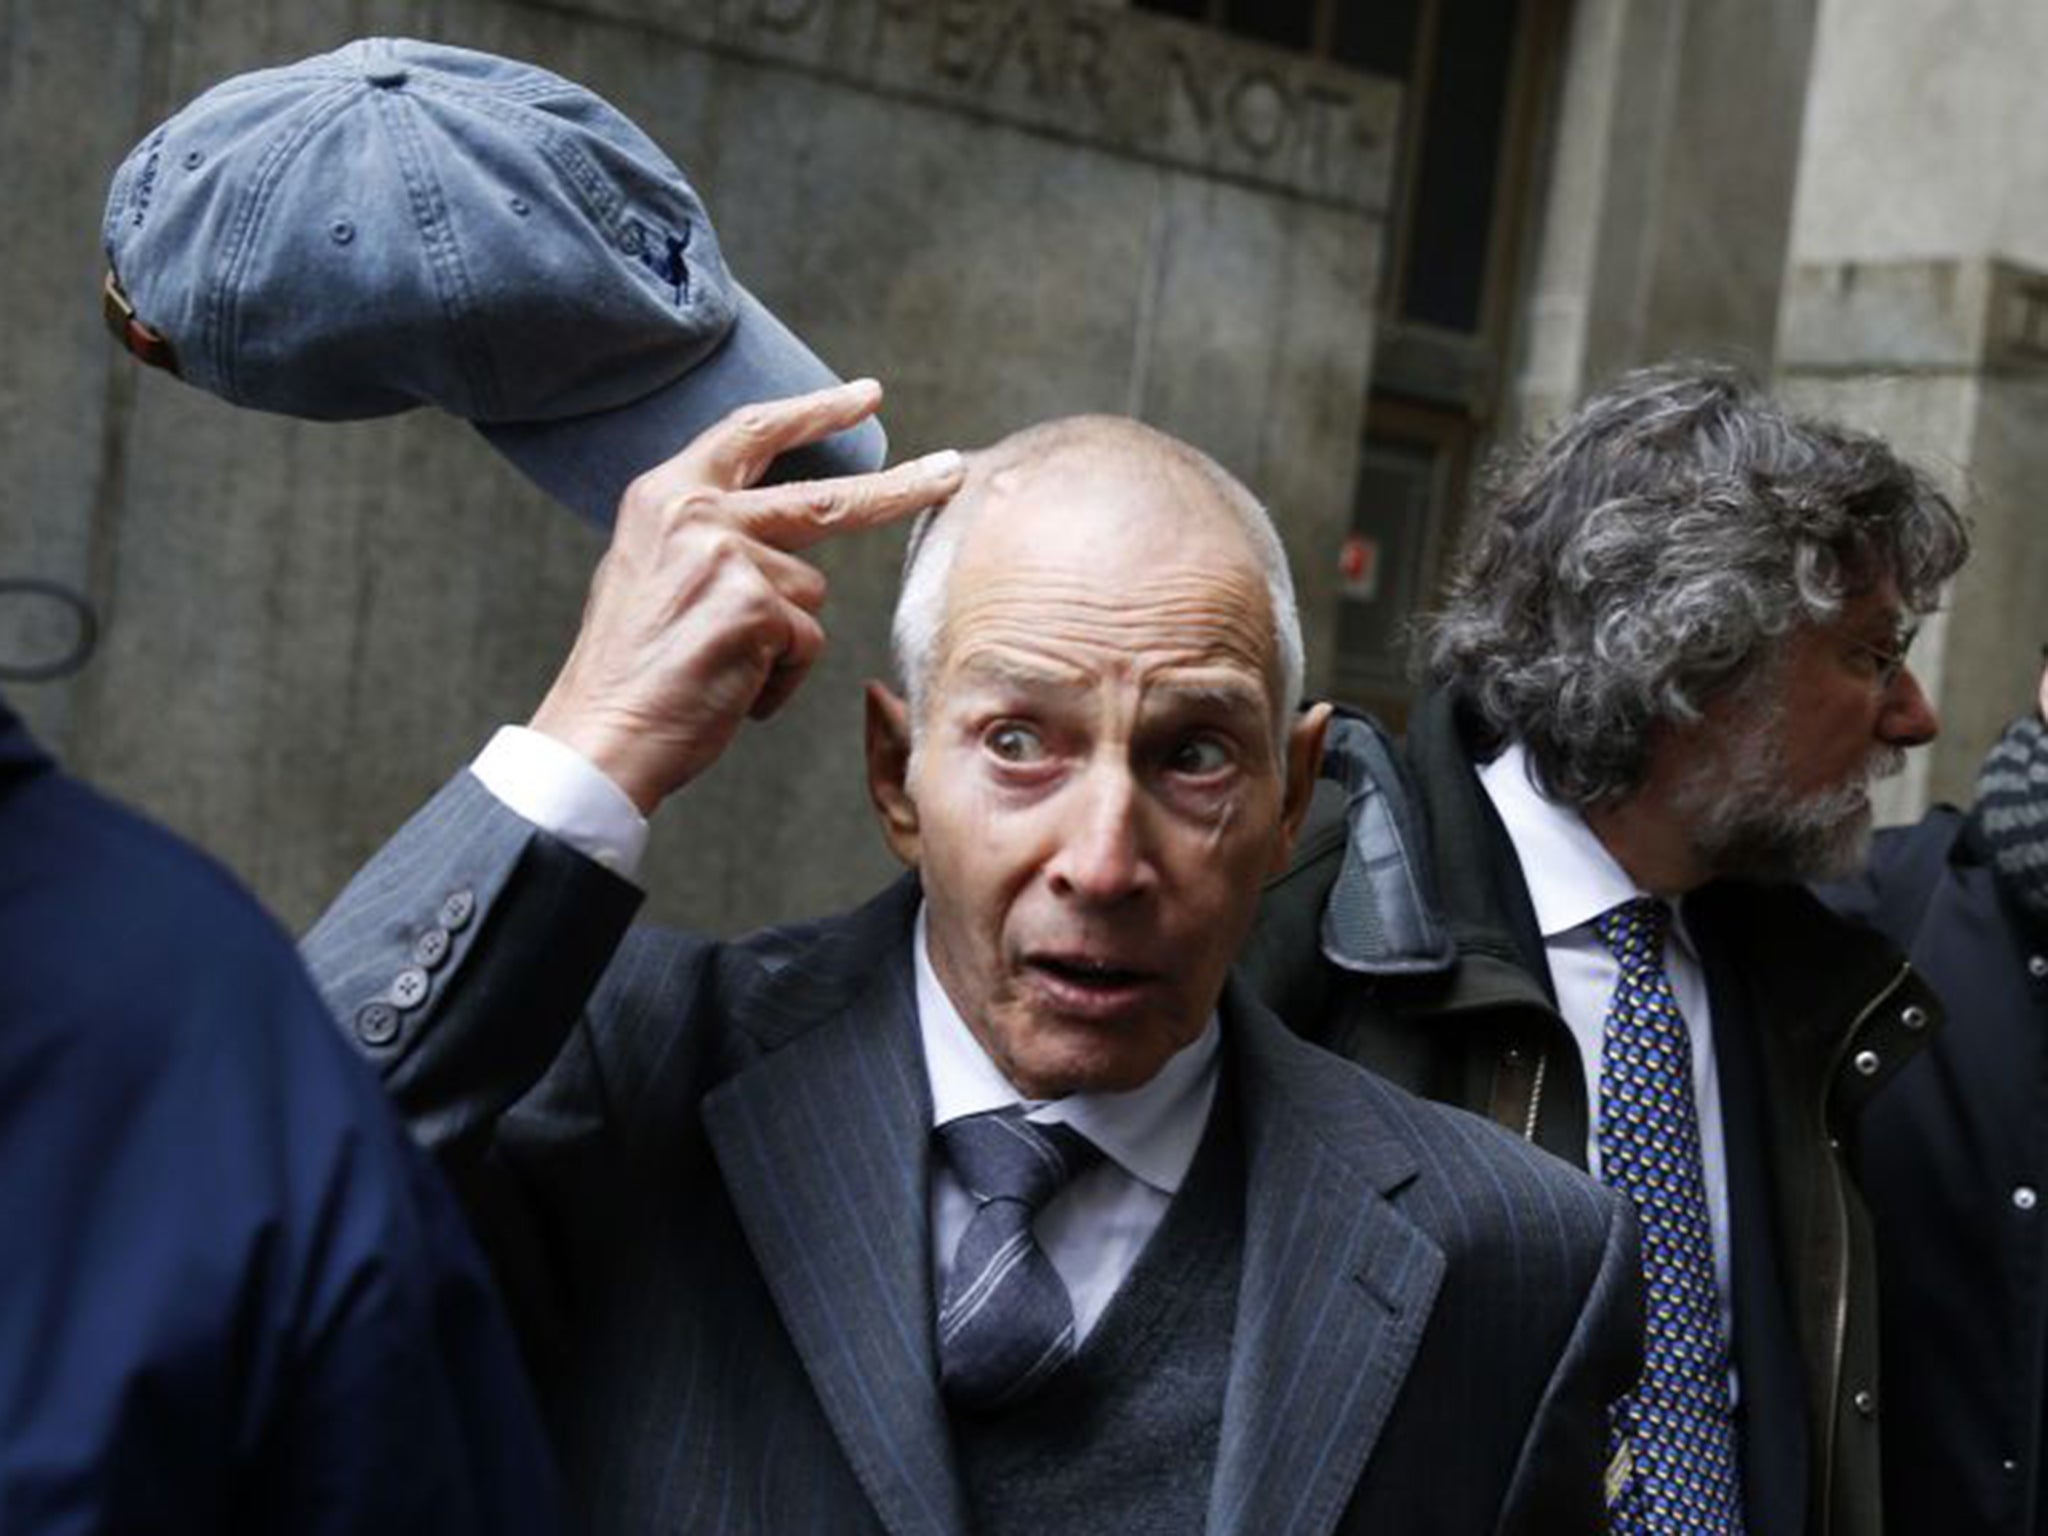 Real estate heir Robert Durst outside a New York court in 2014 during a trespass trial